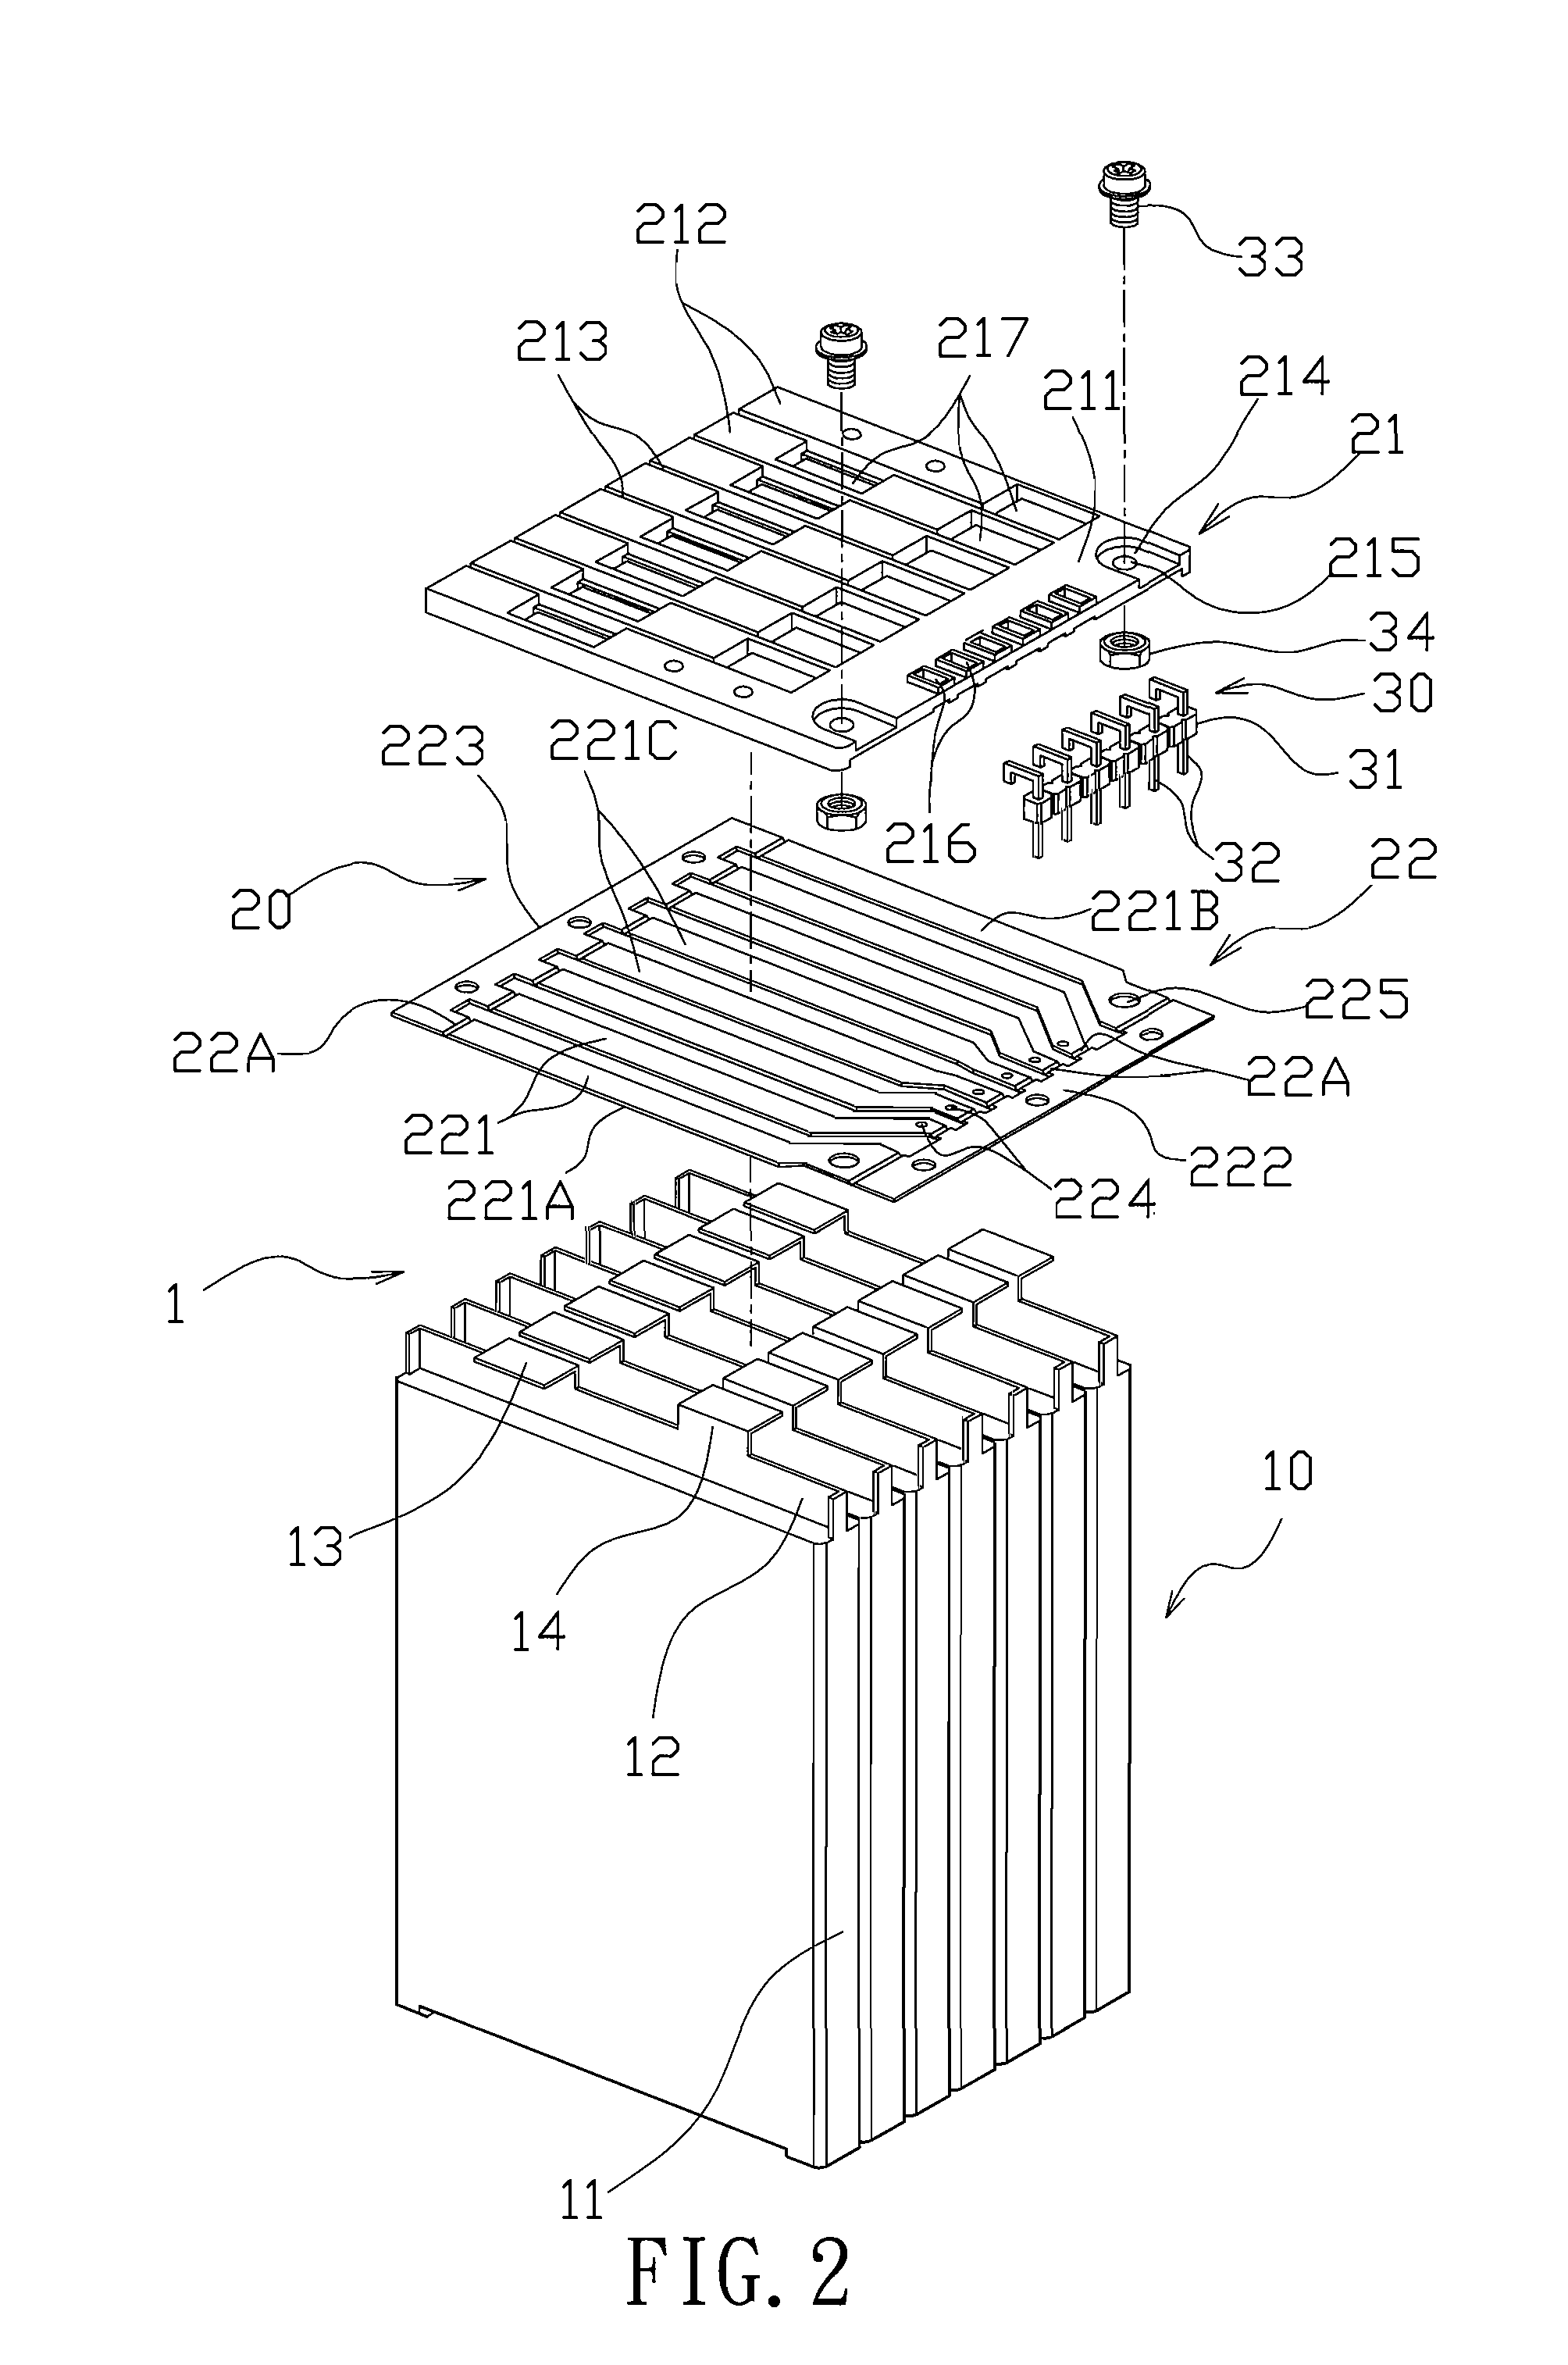 Multi-cells connection board (MCB) assembly and its fabrication method